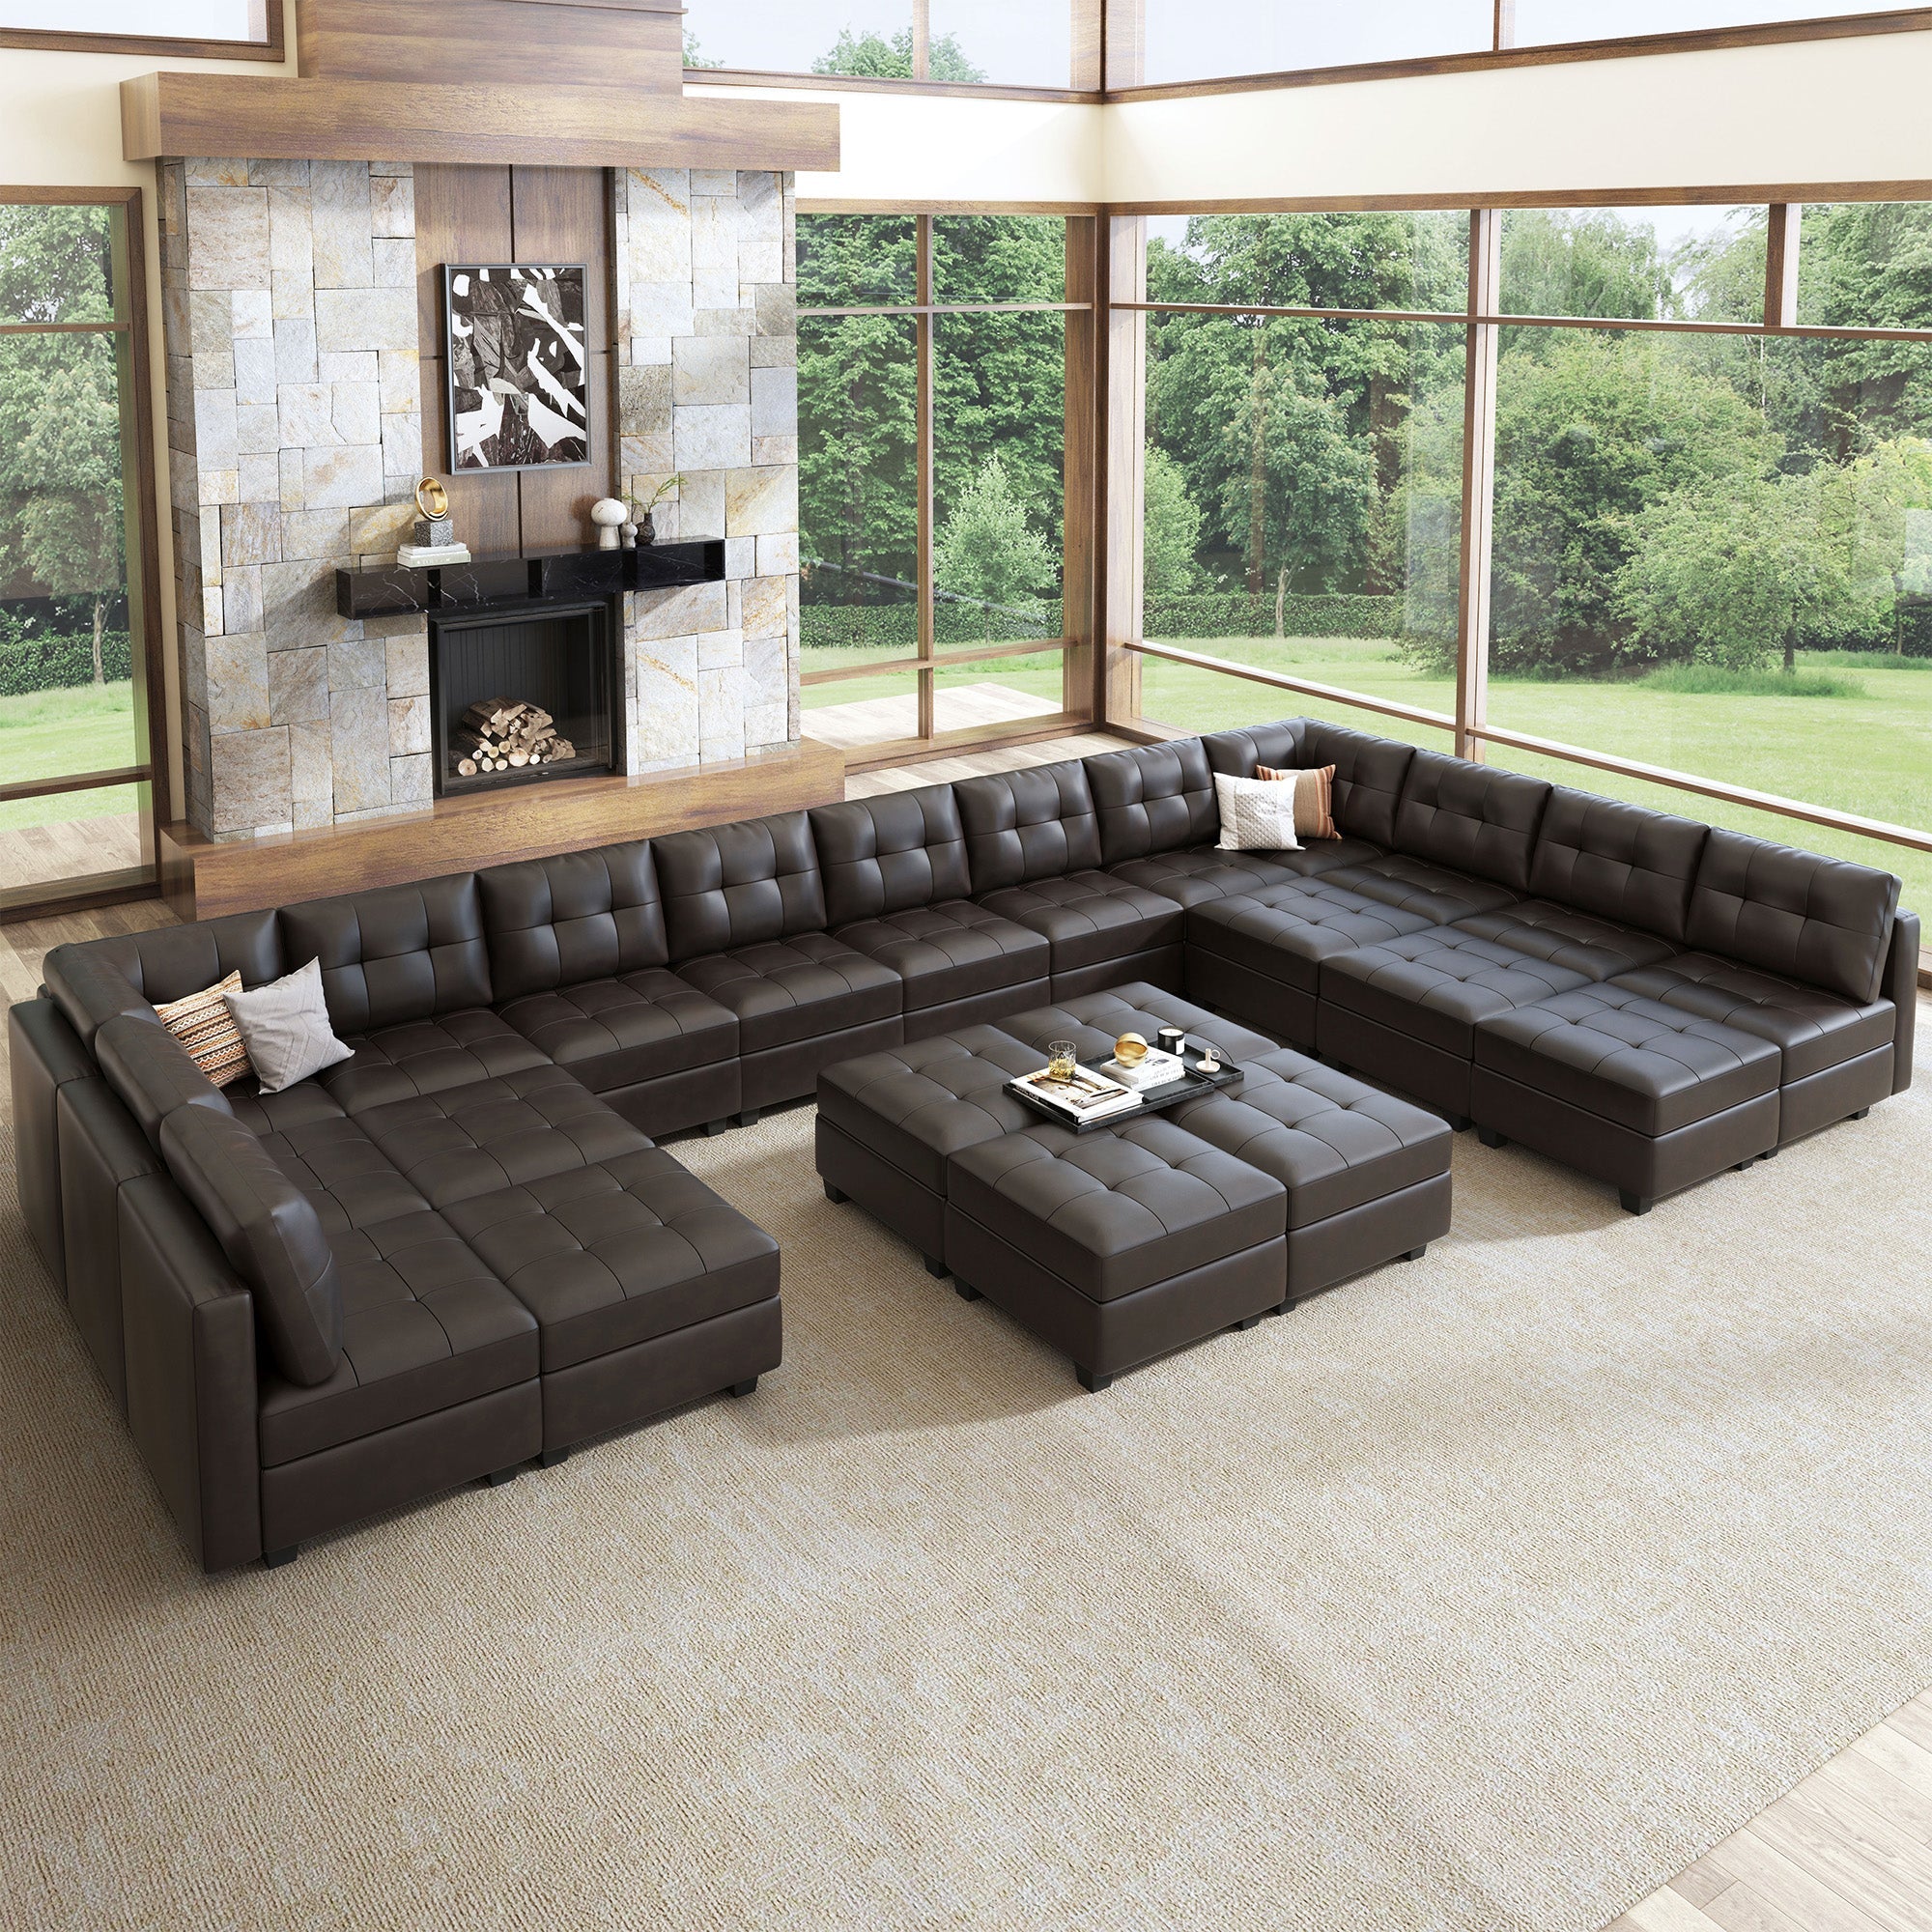 HONBAY 22-Piece Faux Leather Modular Sleeper Sectional With Storage Seat